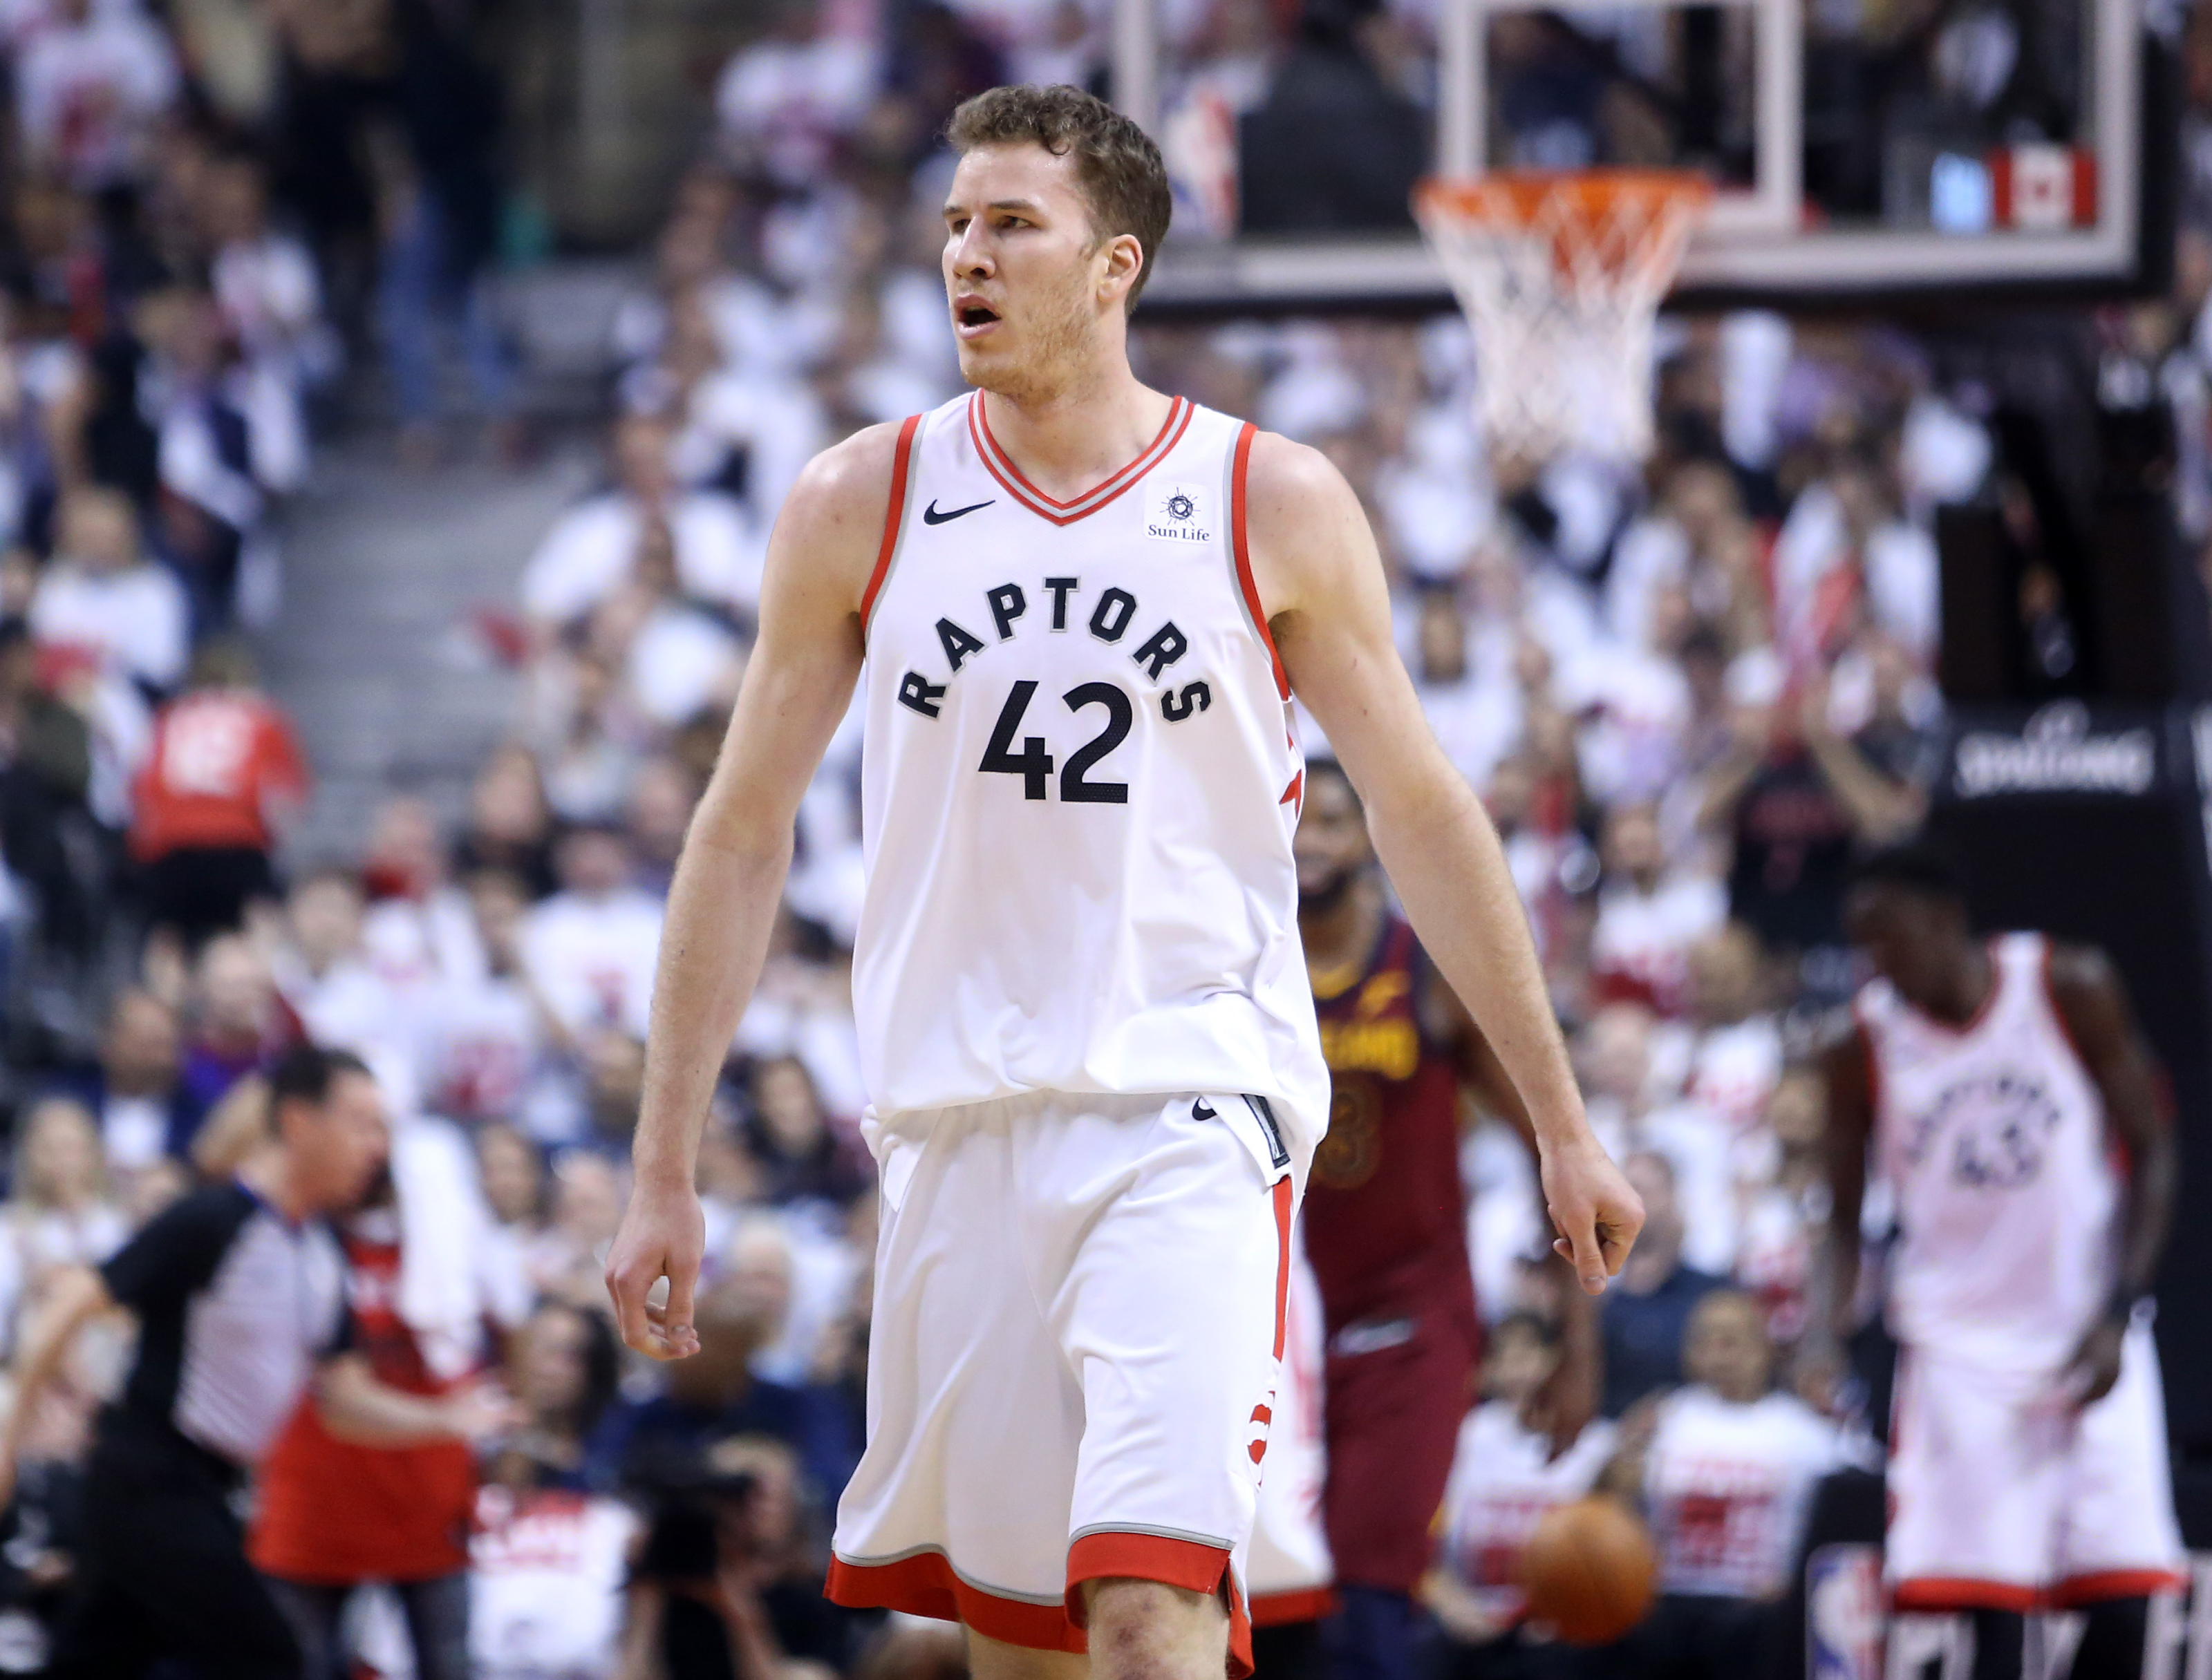 RAPTORS BLOG: Early numbers show Jakob Poeltl making big impact while on  the court so far